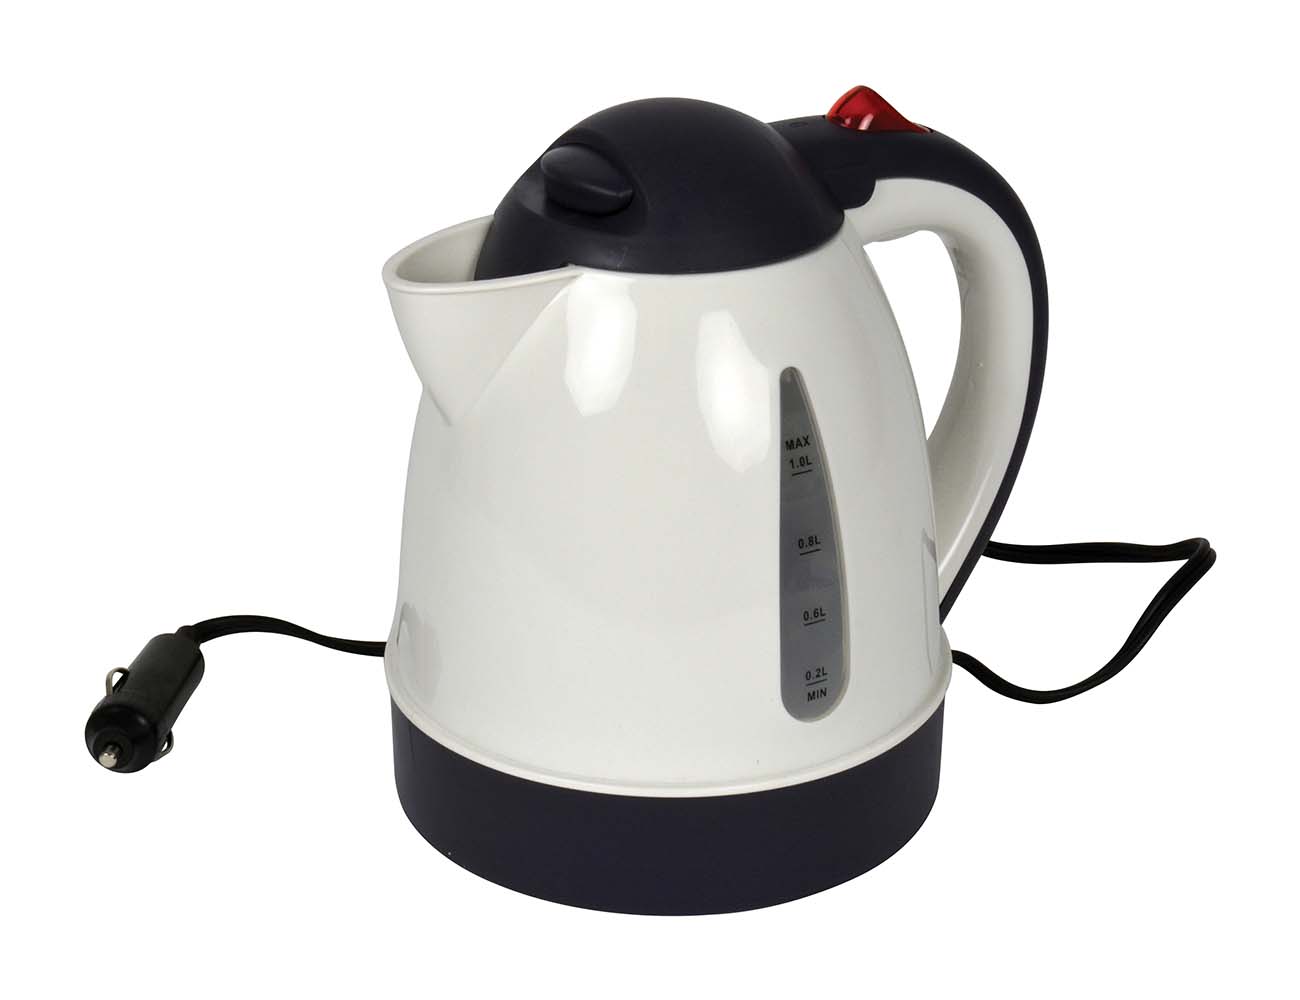 5110175 A compact kettle. Ideal for in the car, boat or caravan due to the fused 12-volt car connection. The kettle has an automatic shut-off and boil-dry protection.